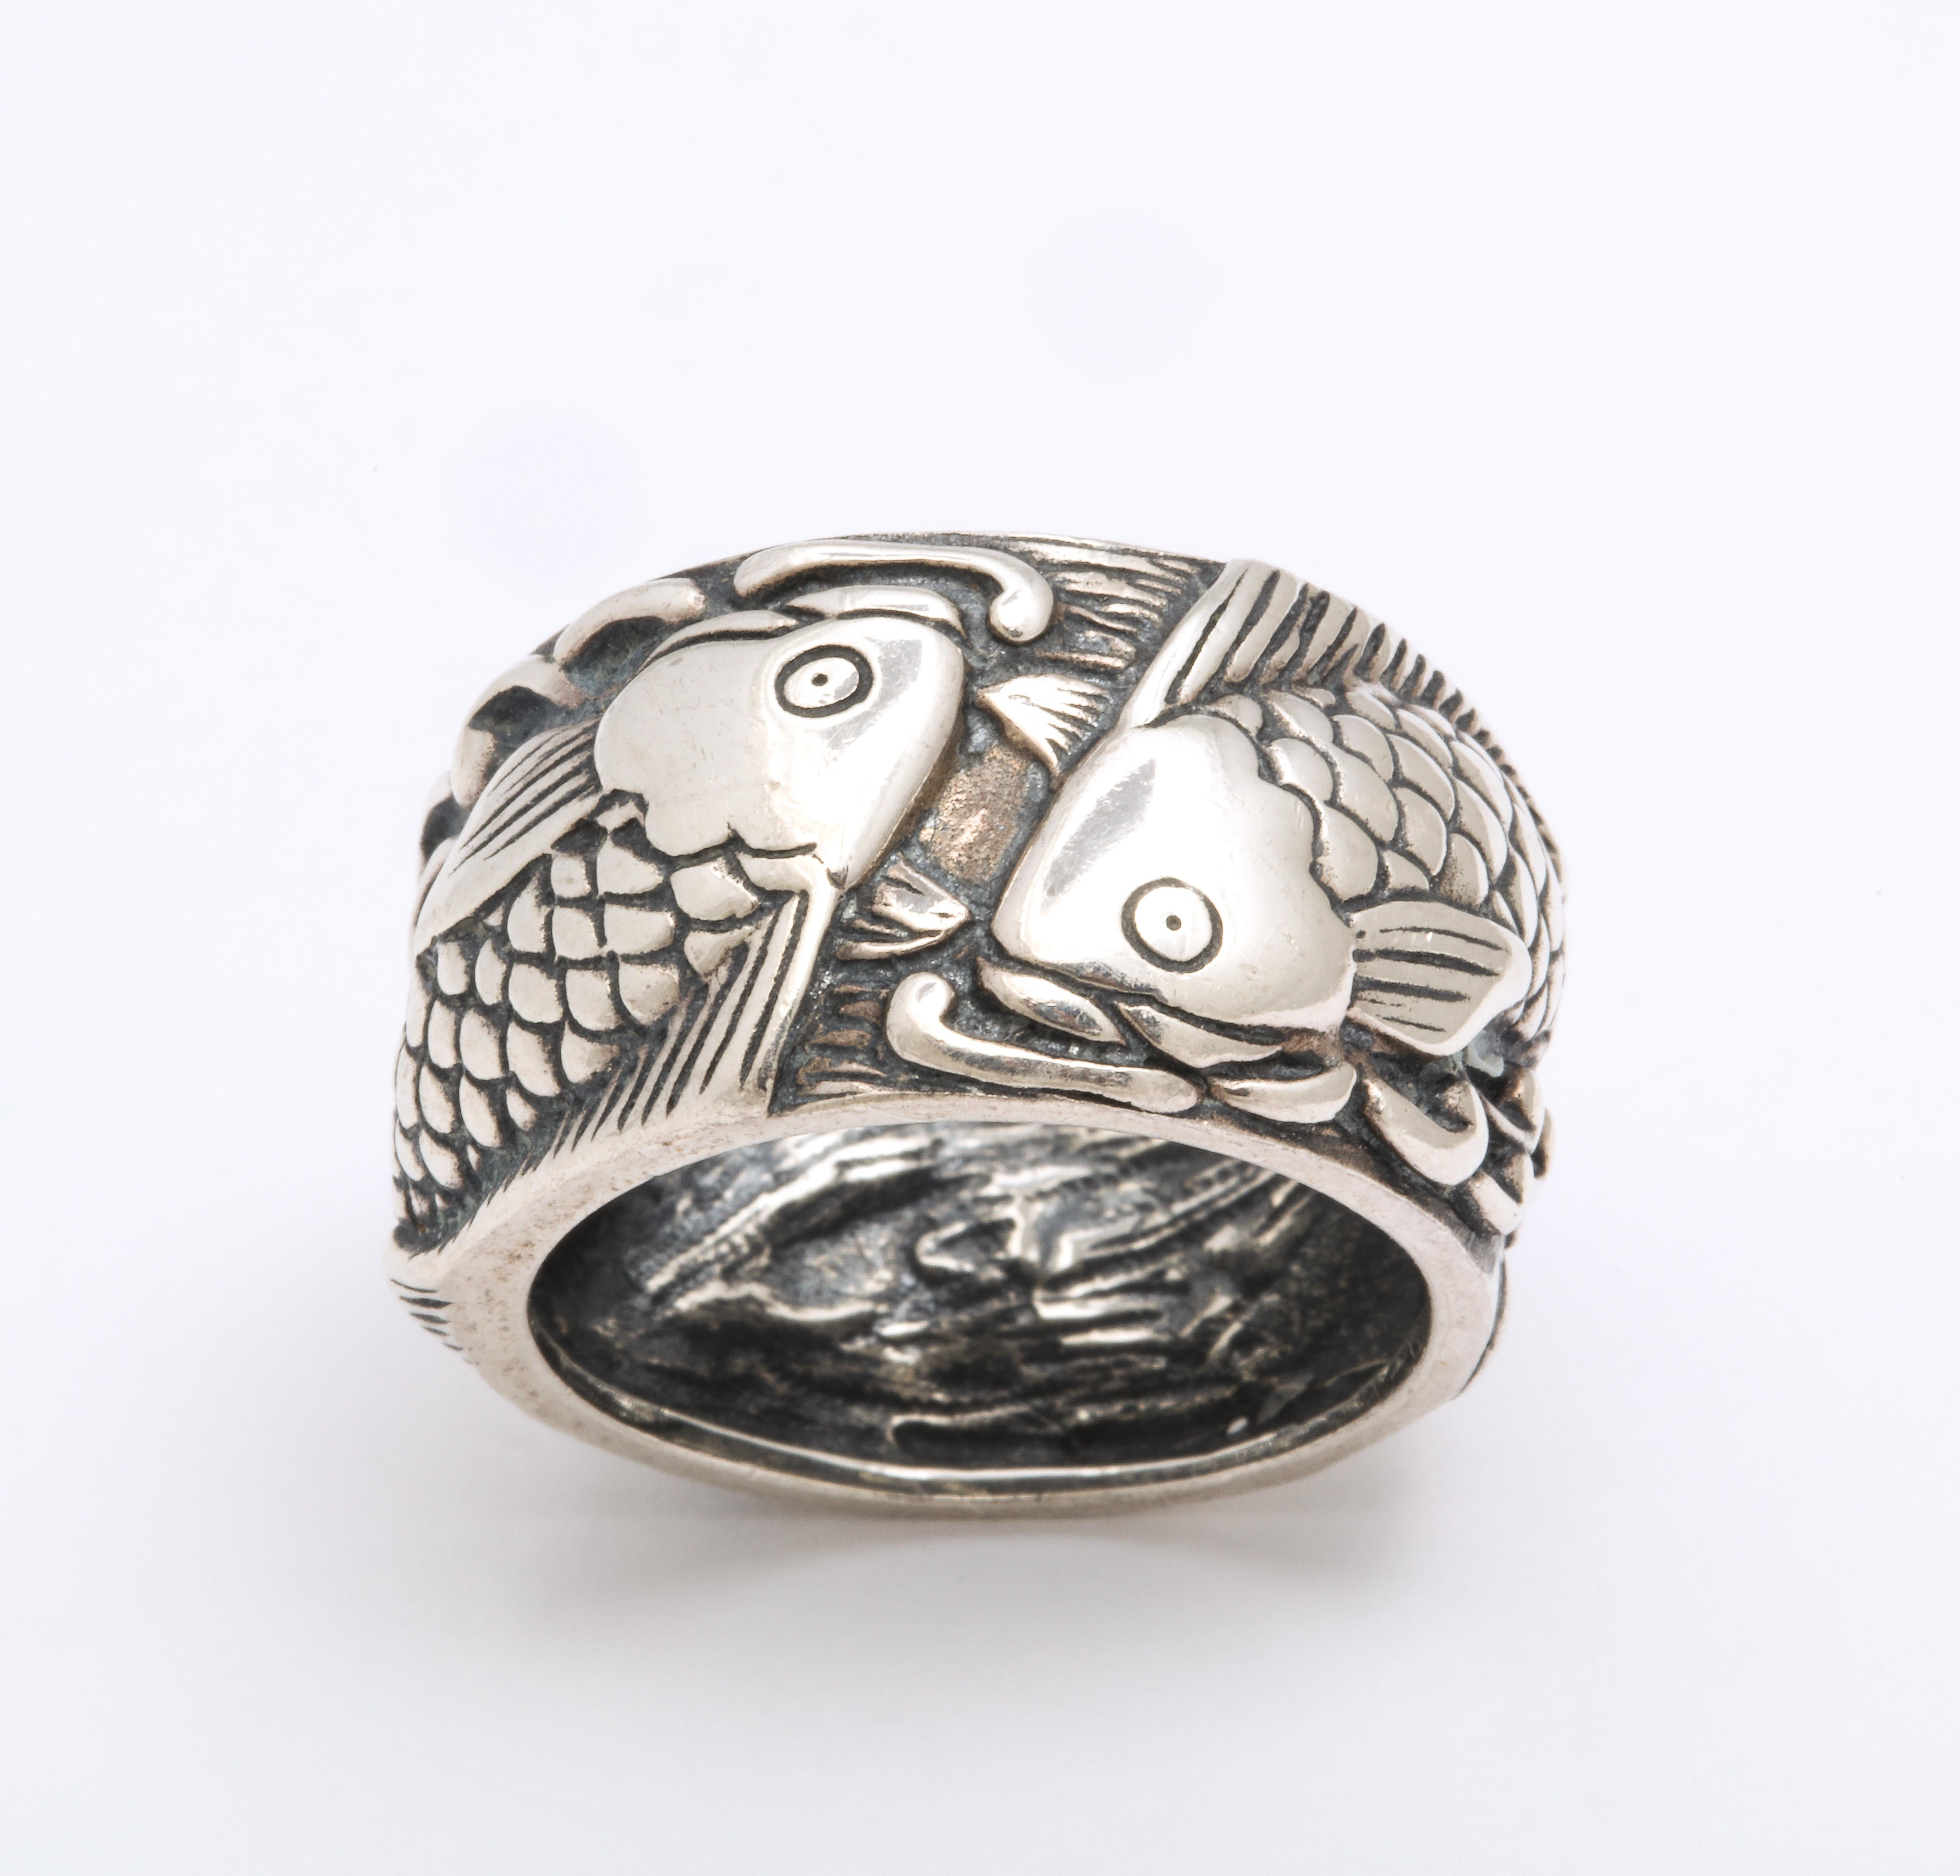 This is a mid century silver Pisces ring that is crisply engraved with so much detail and whimsy that I can't help but smile One does bot have to be a Pisces to enjoy the fun of this ring. Two fish splash their way through the waves. The splashes